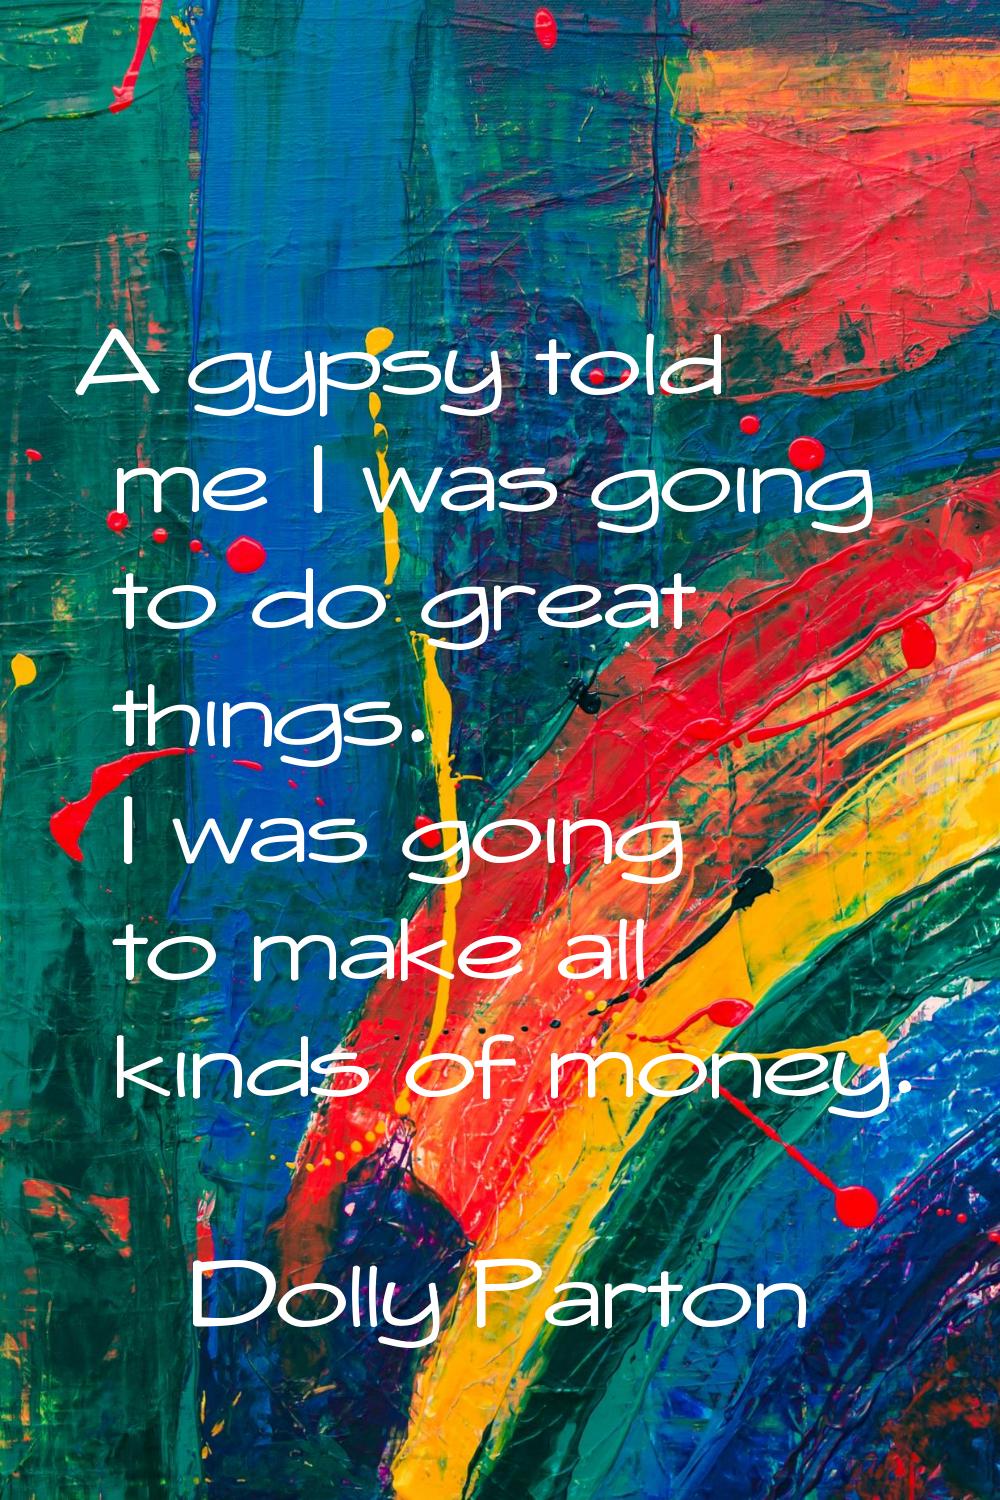 A gypsy told me I was going to do great things. I was going to make all kinds of money.